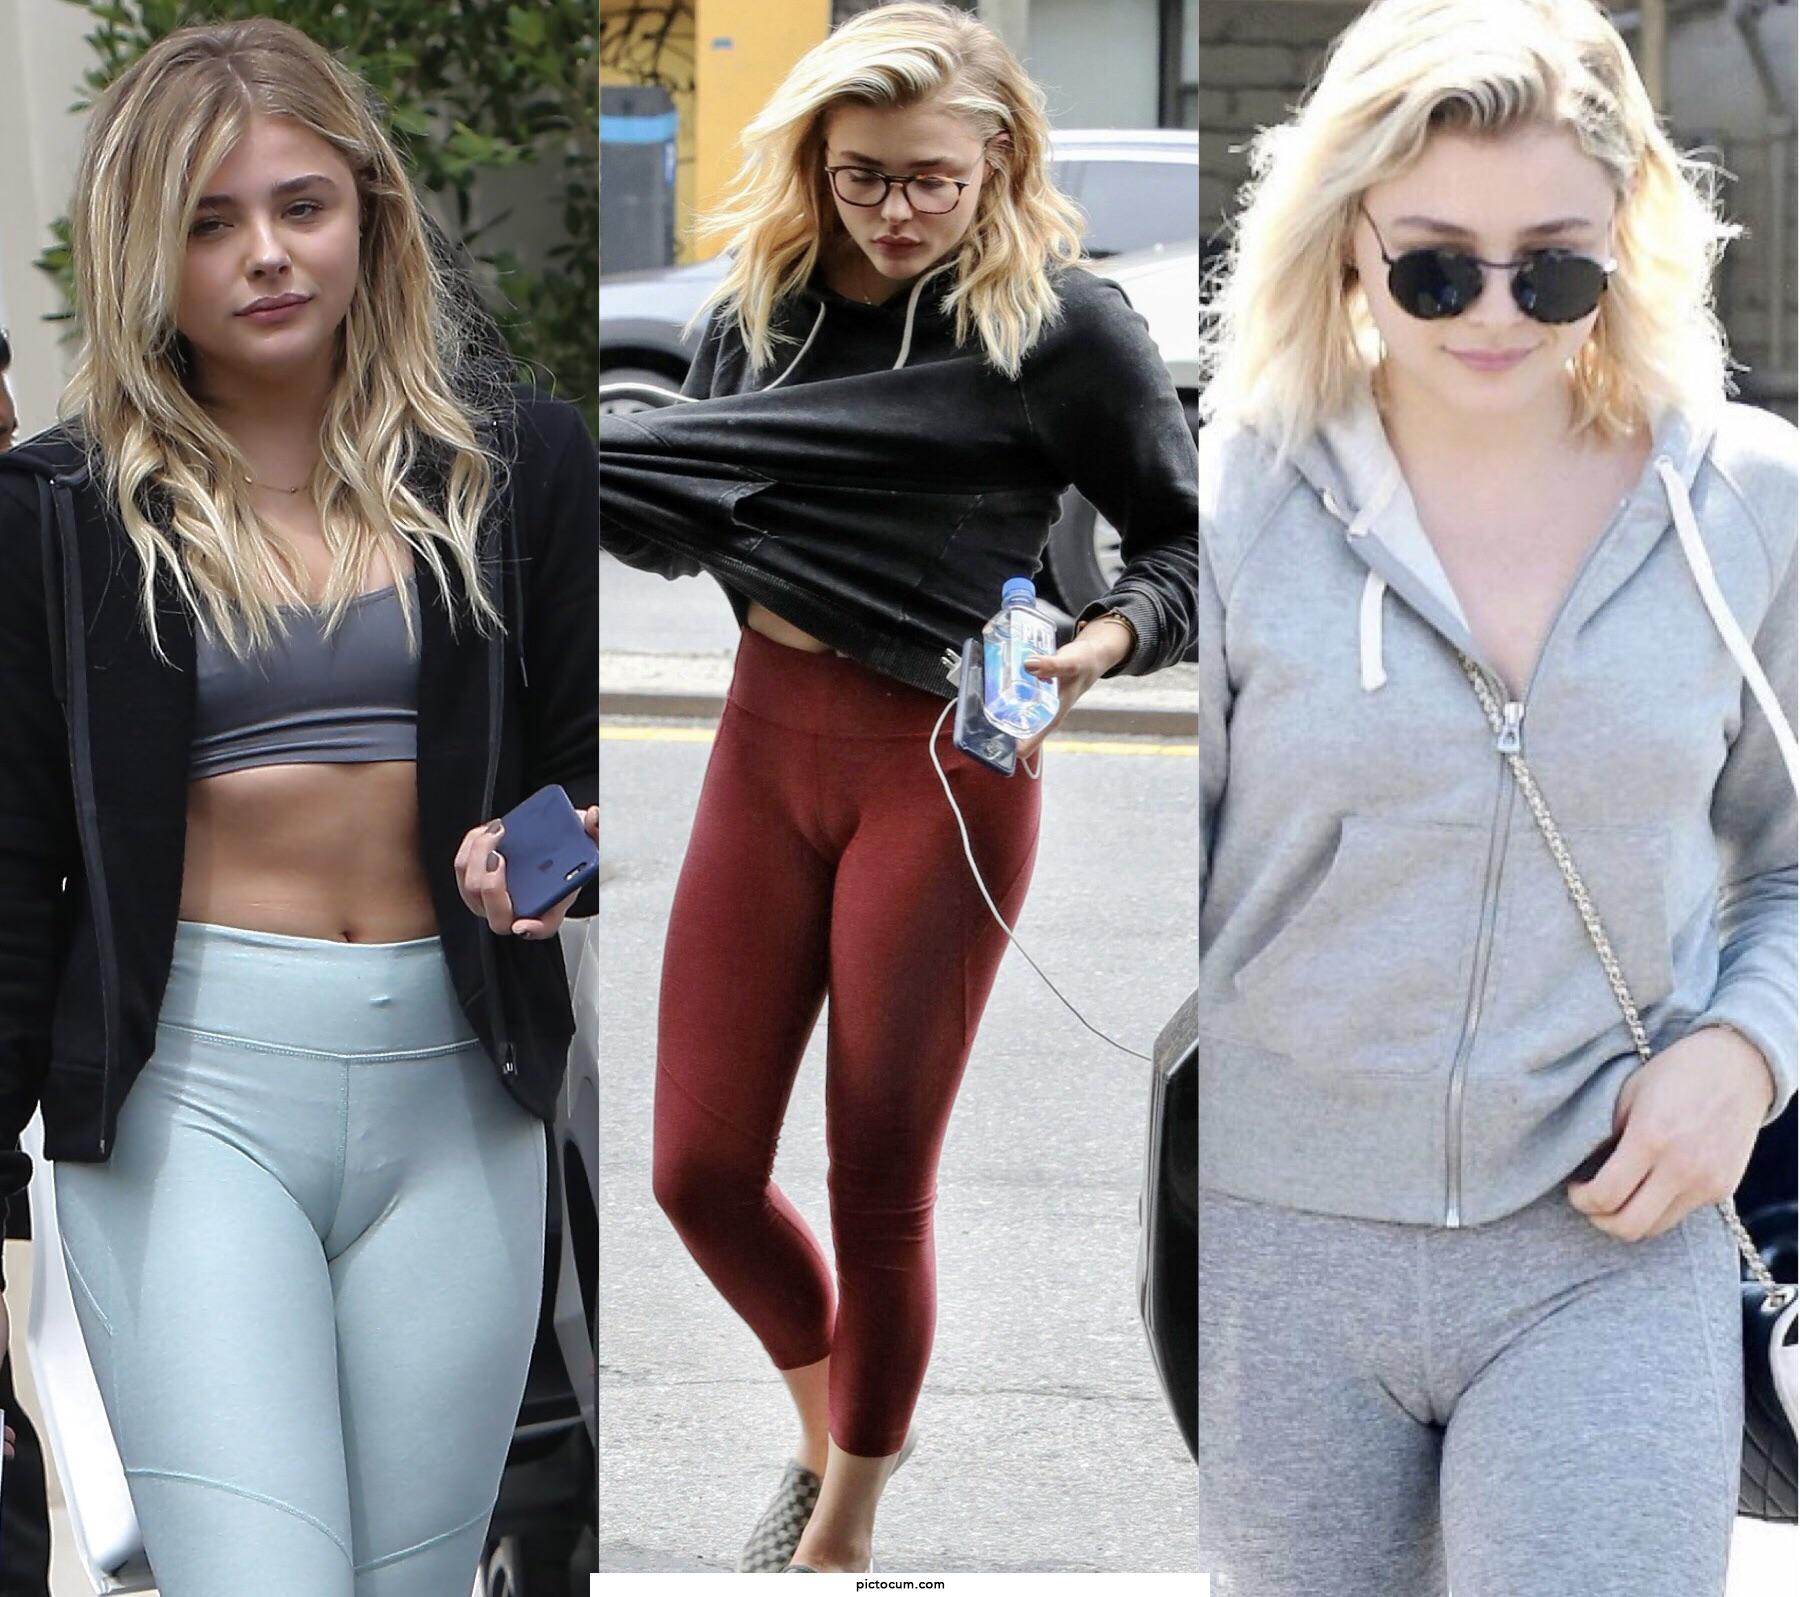 Chloë Grace Moretz knew exactly what she was doing here…